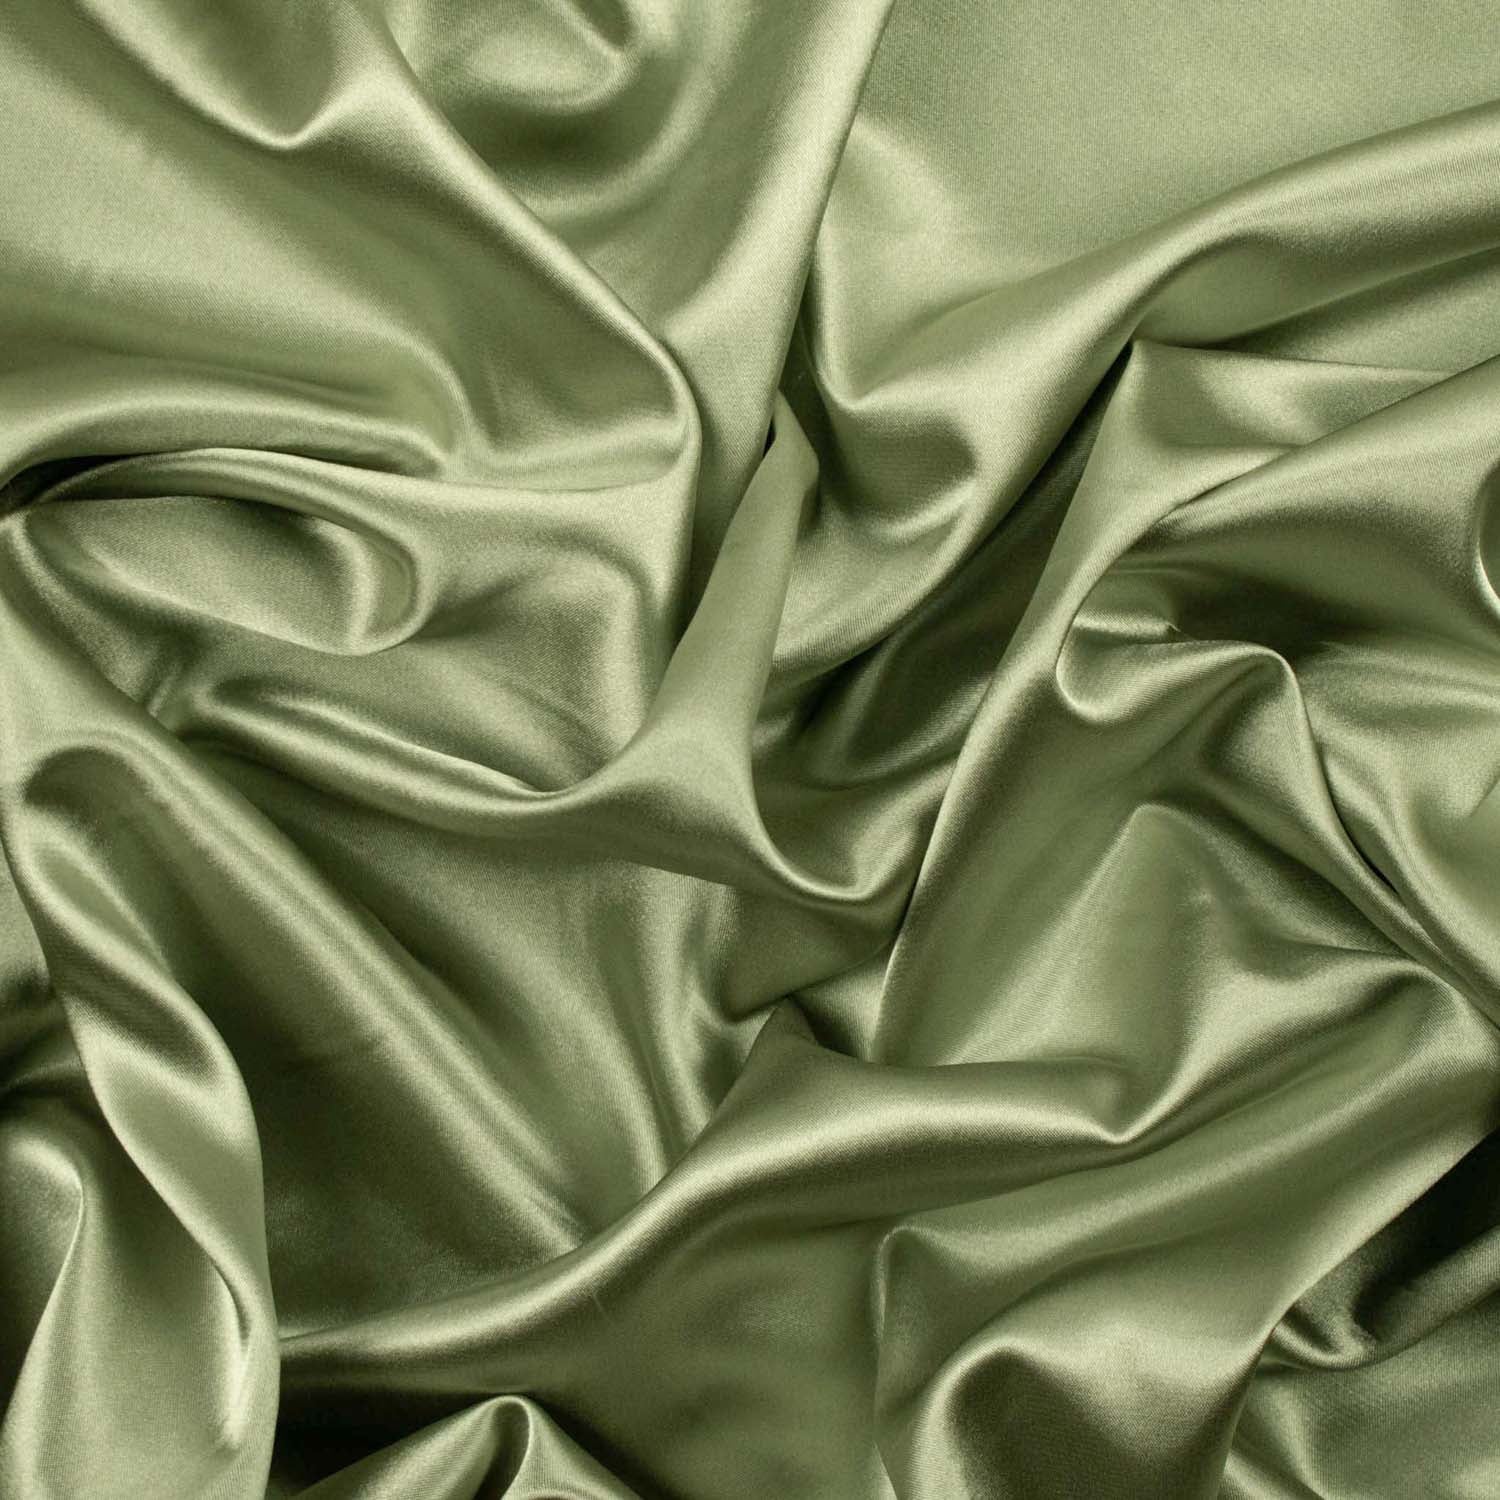 polyester spandex satin fabric shiny stretch satin fabric dress shirt  lingerie nude gold pink many colors 150cm wide